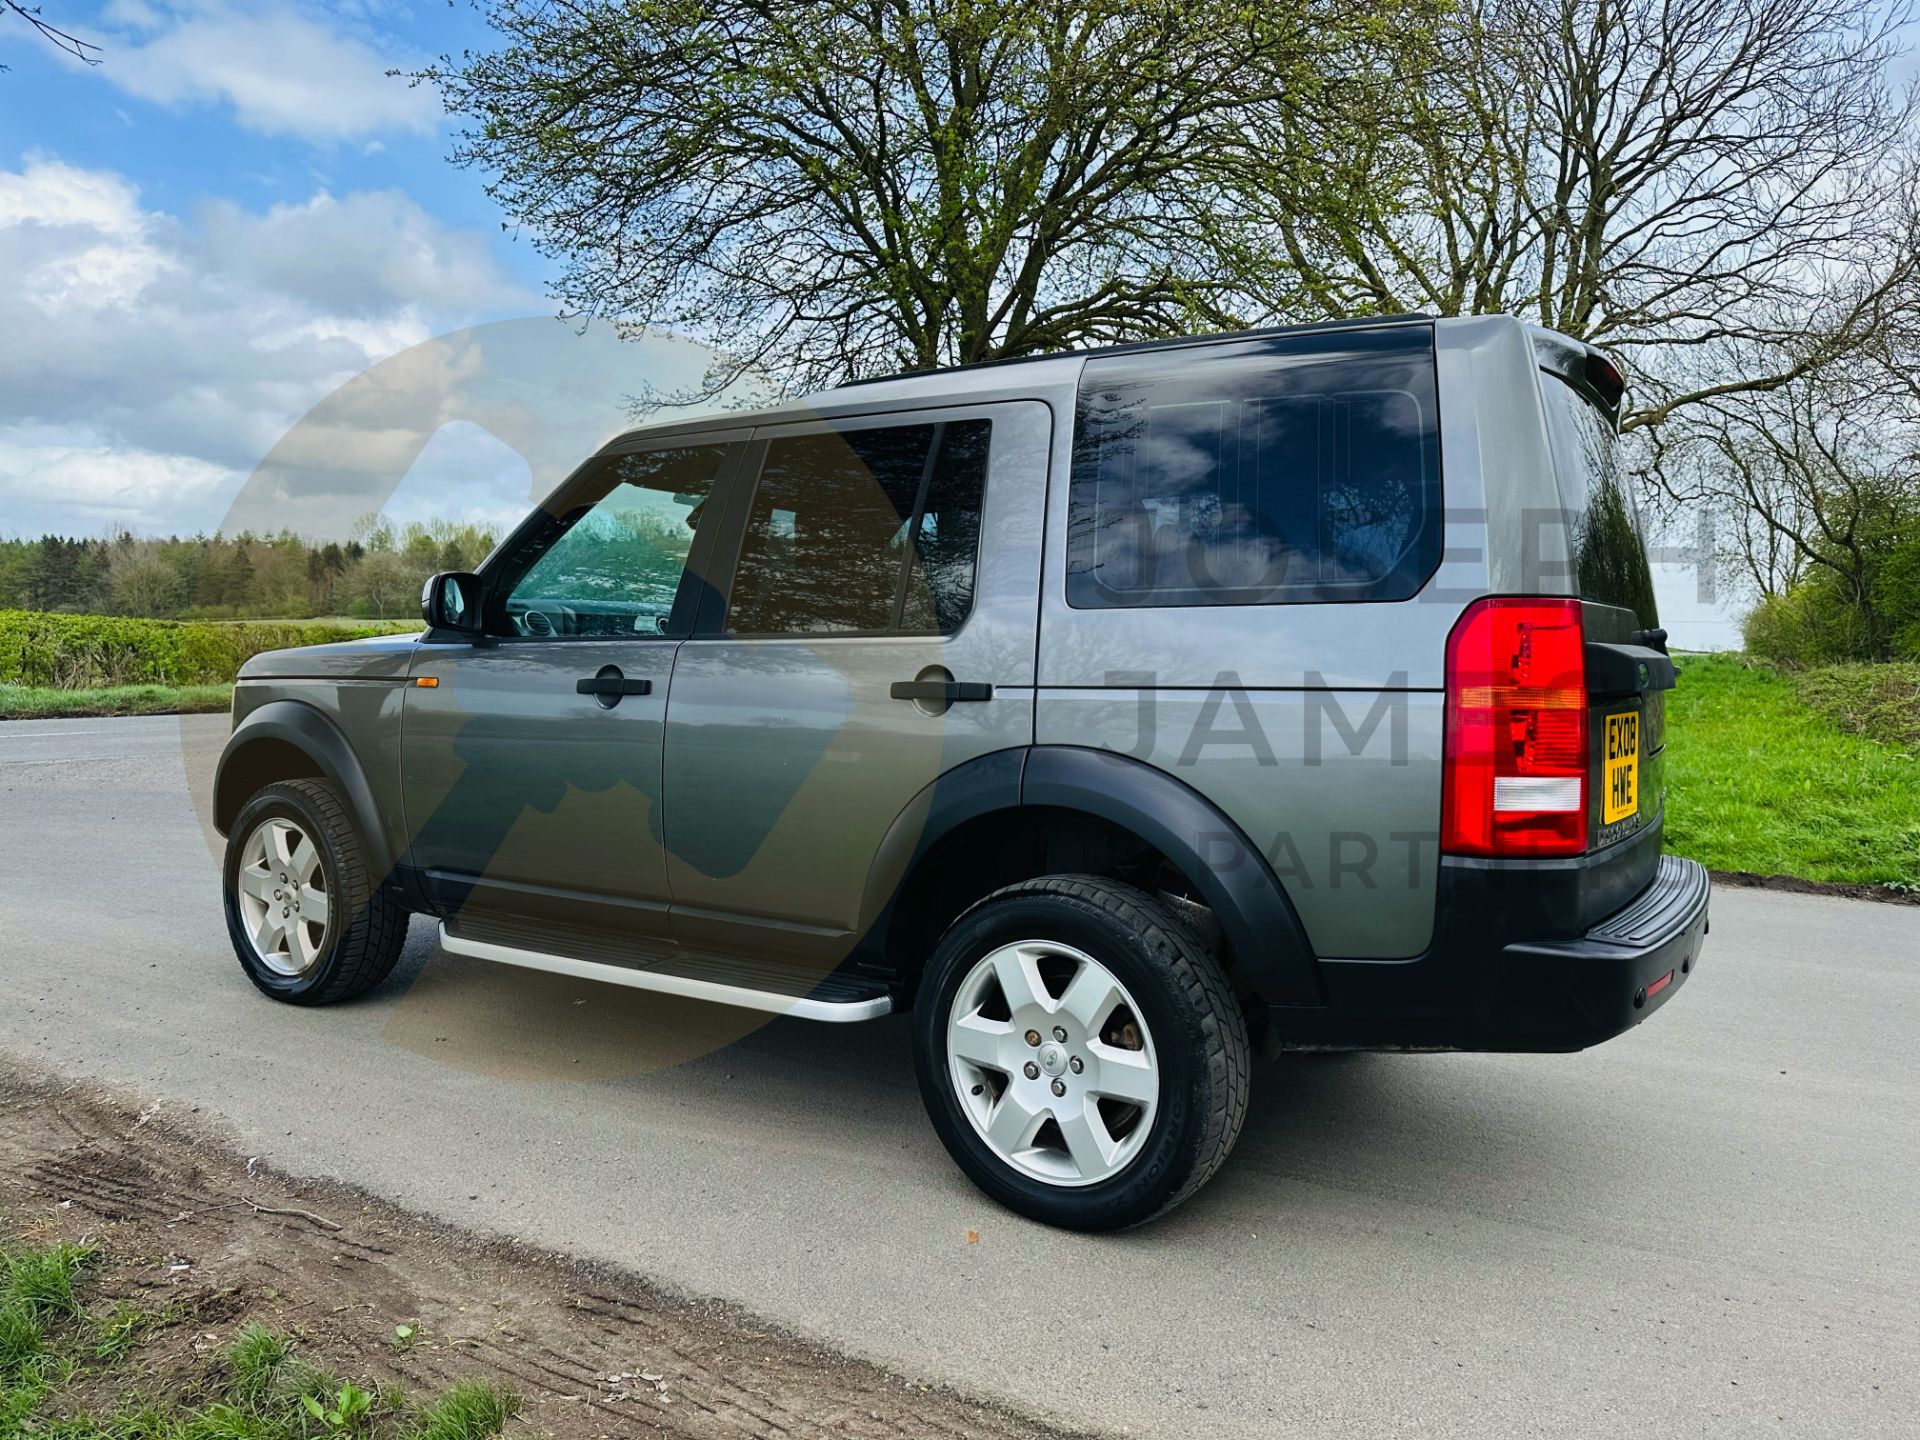 (ON SALE) LAND ROVER DISCOVERY TDV6 *HSE EDITION* AUTO (08 REG) 7 SEATER - 12X SERVICES (NO VAT) - Image 7 of 51